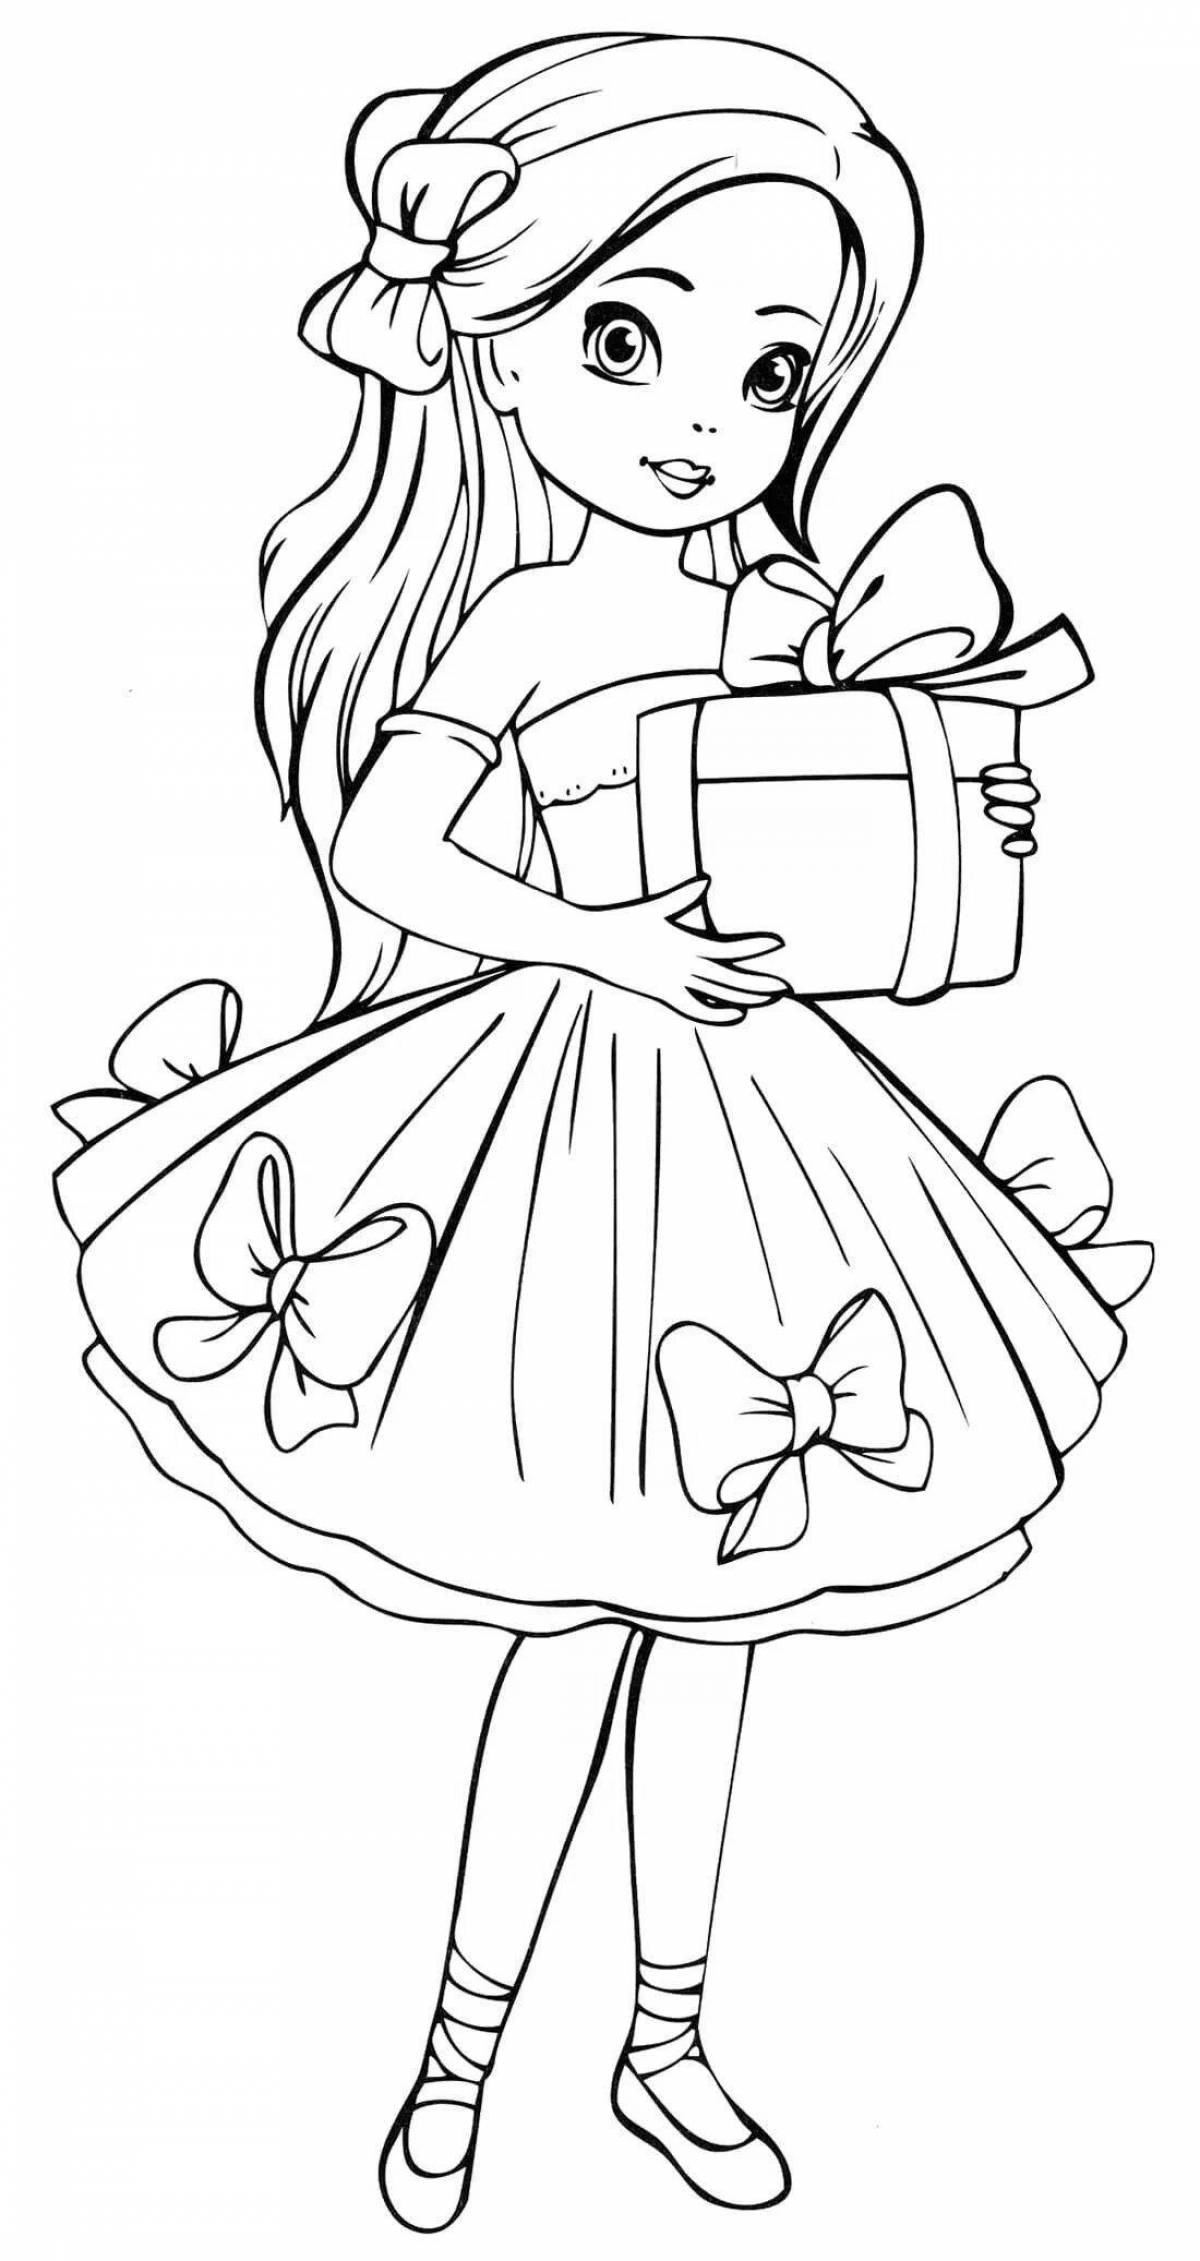 Amazing Alice coloring pages for girls